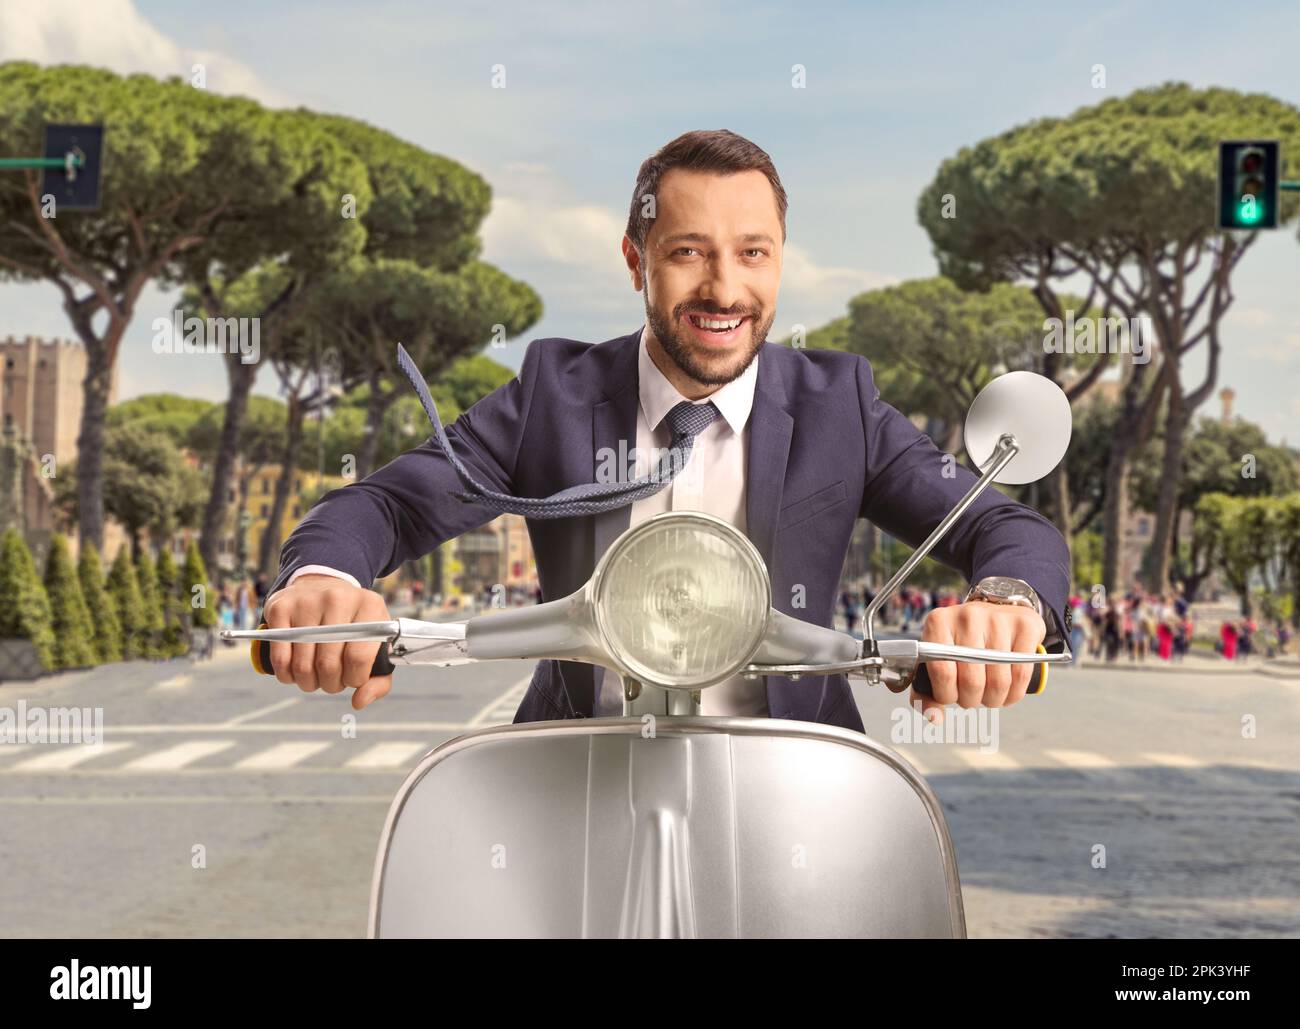 Young man riding a silver scooter on the streets of Rome, Italy Stock Photo